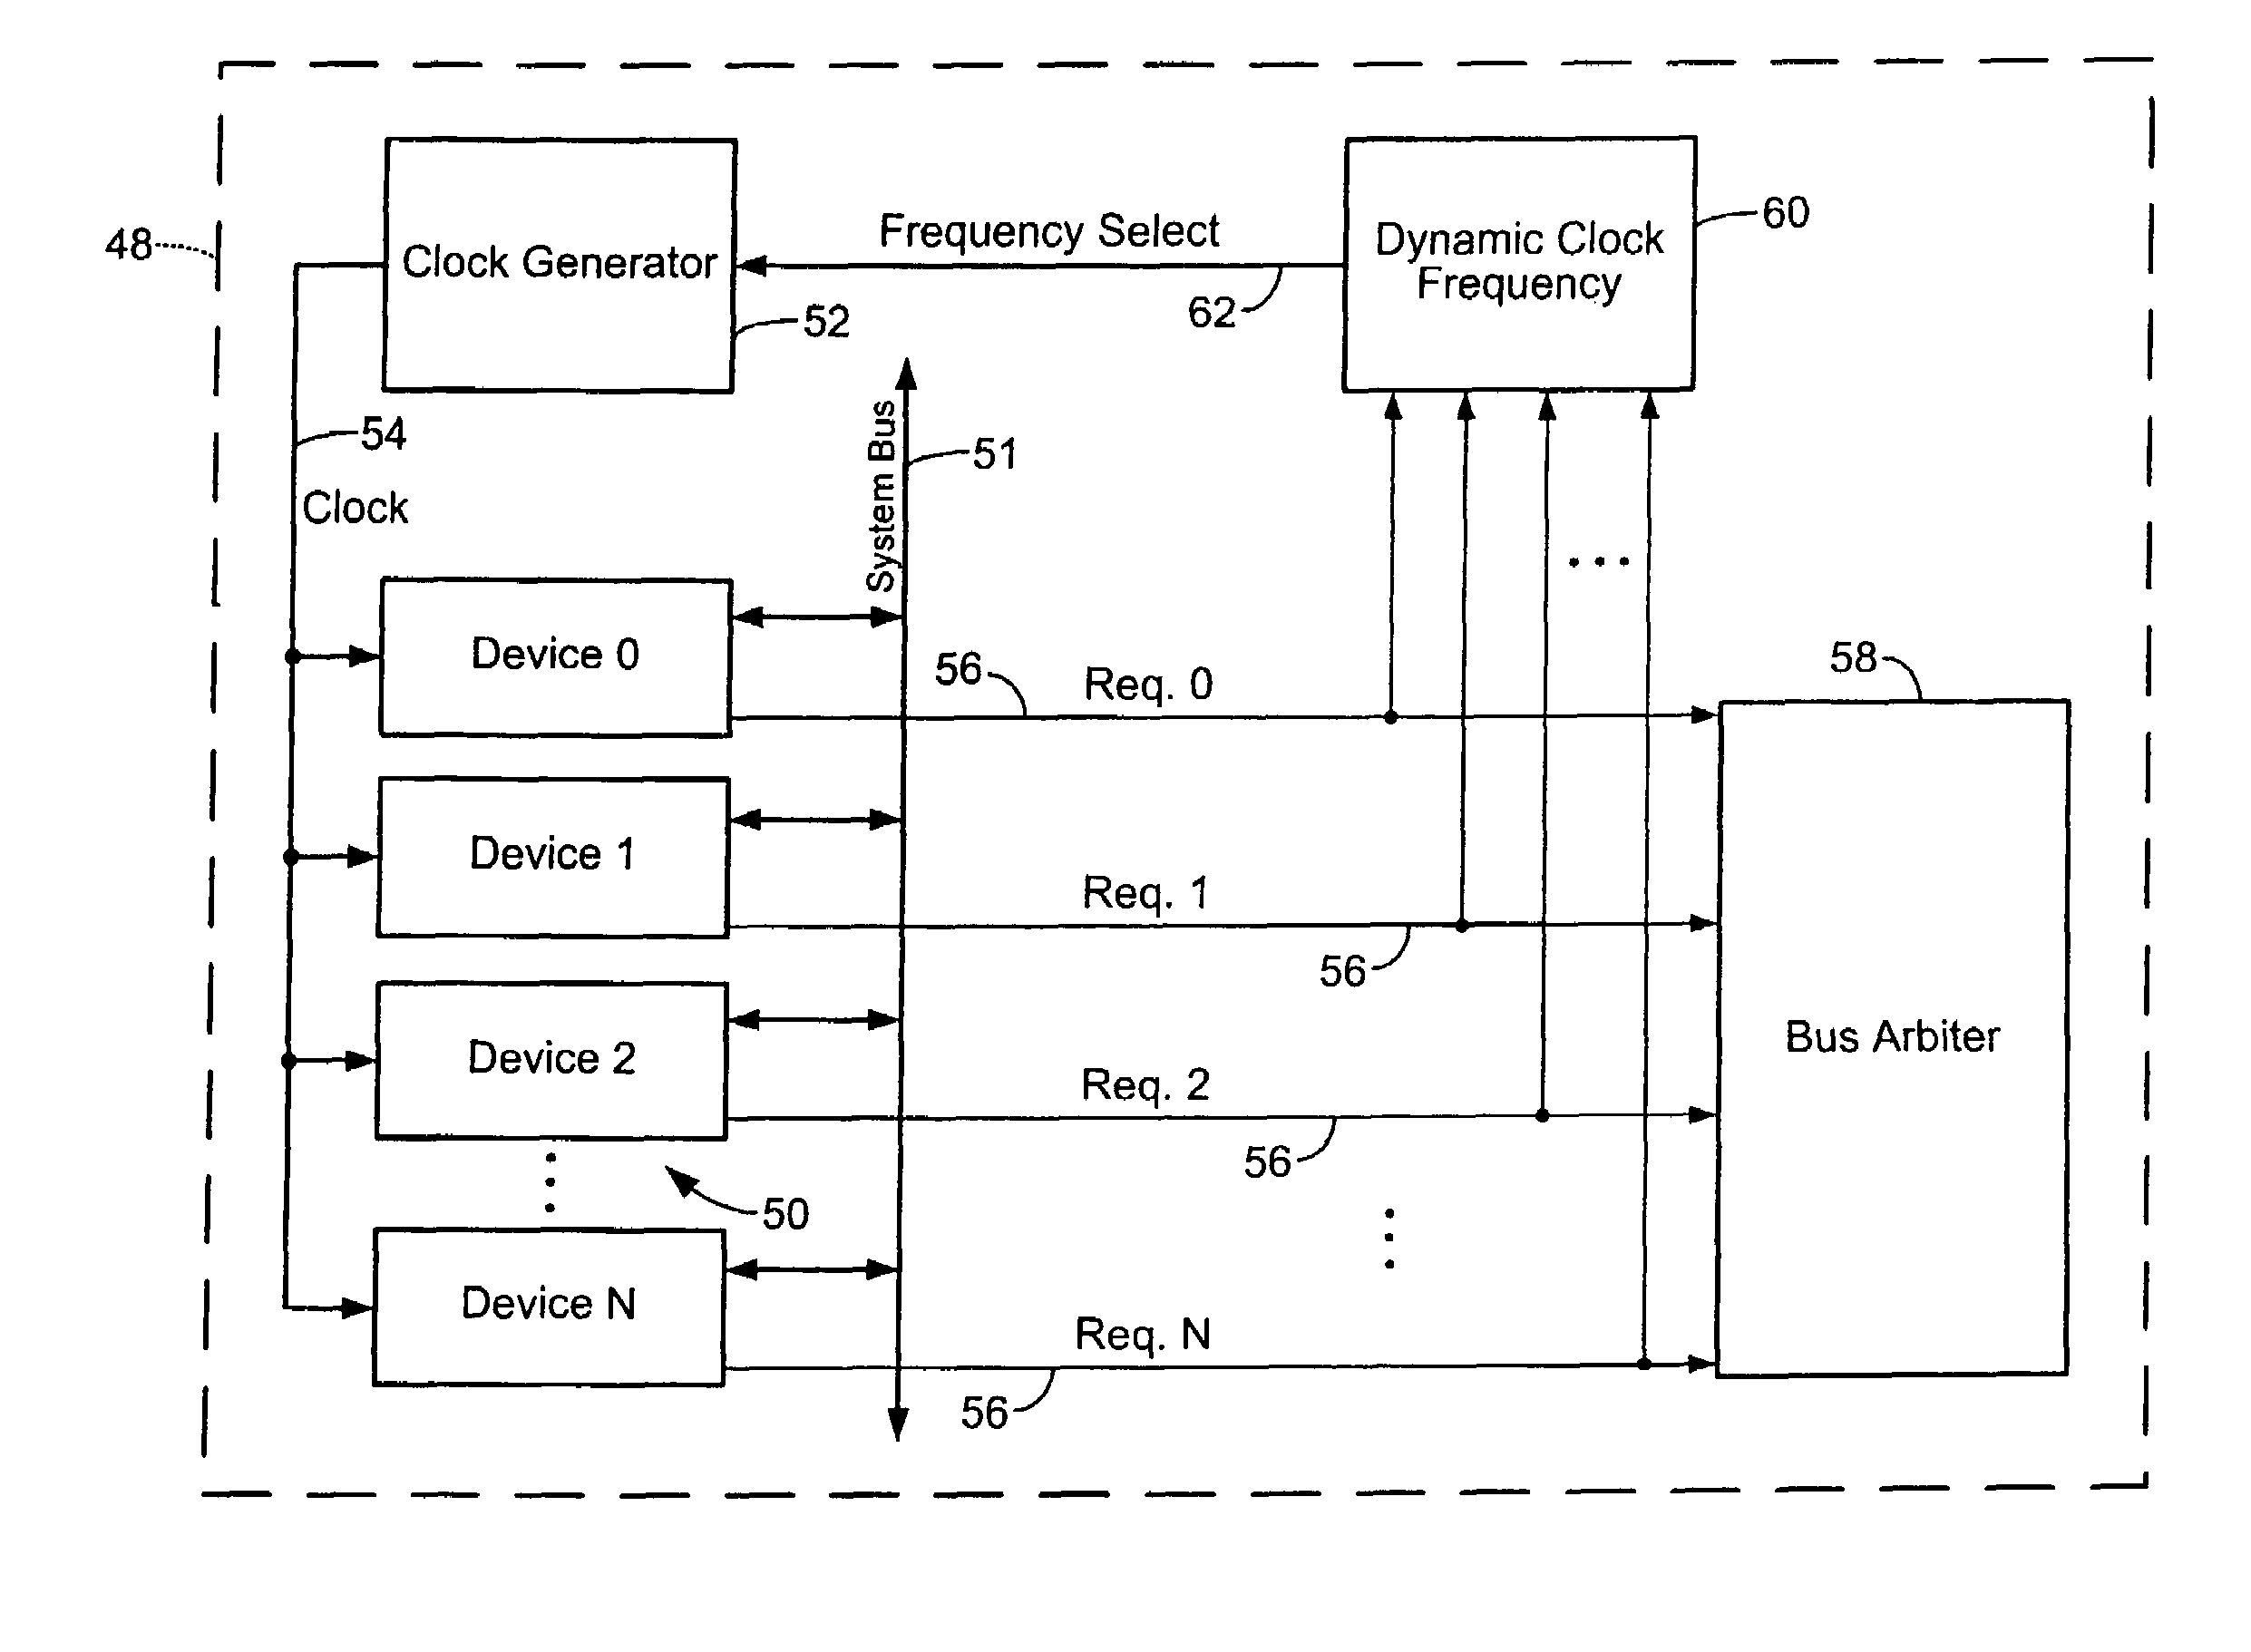 System-on-chip power reduction through dynamic clock frequency